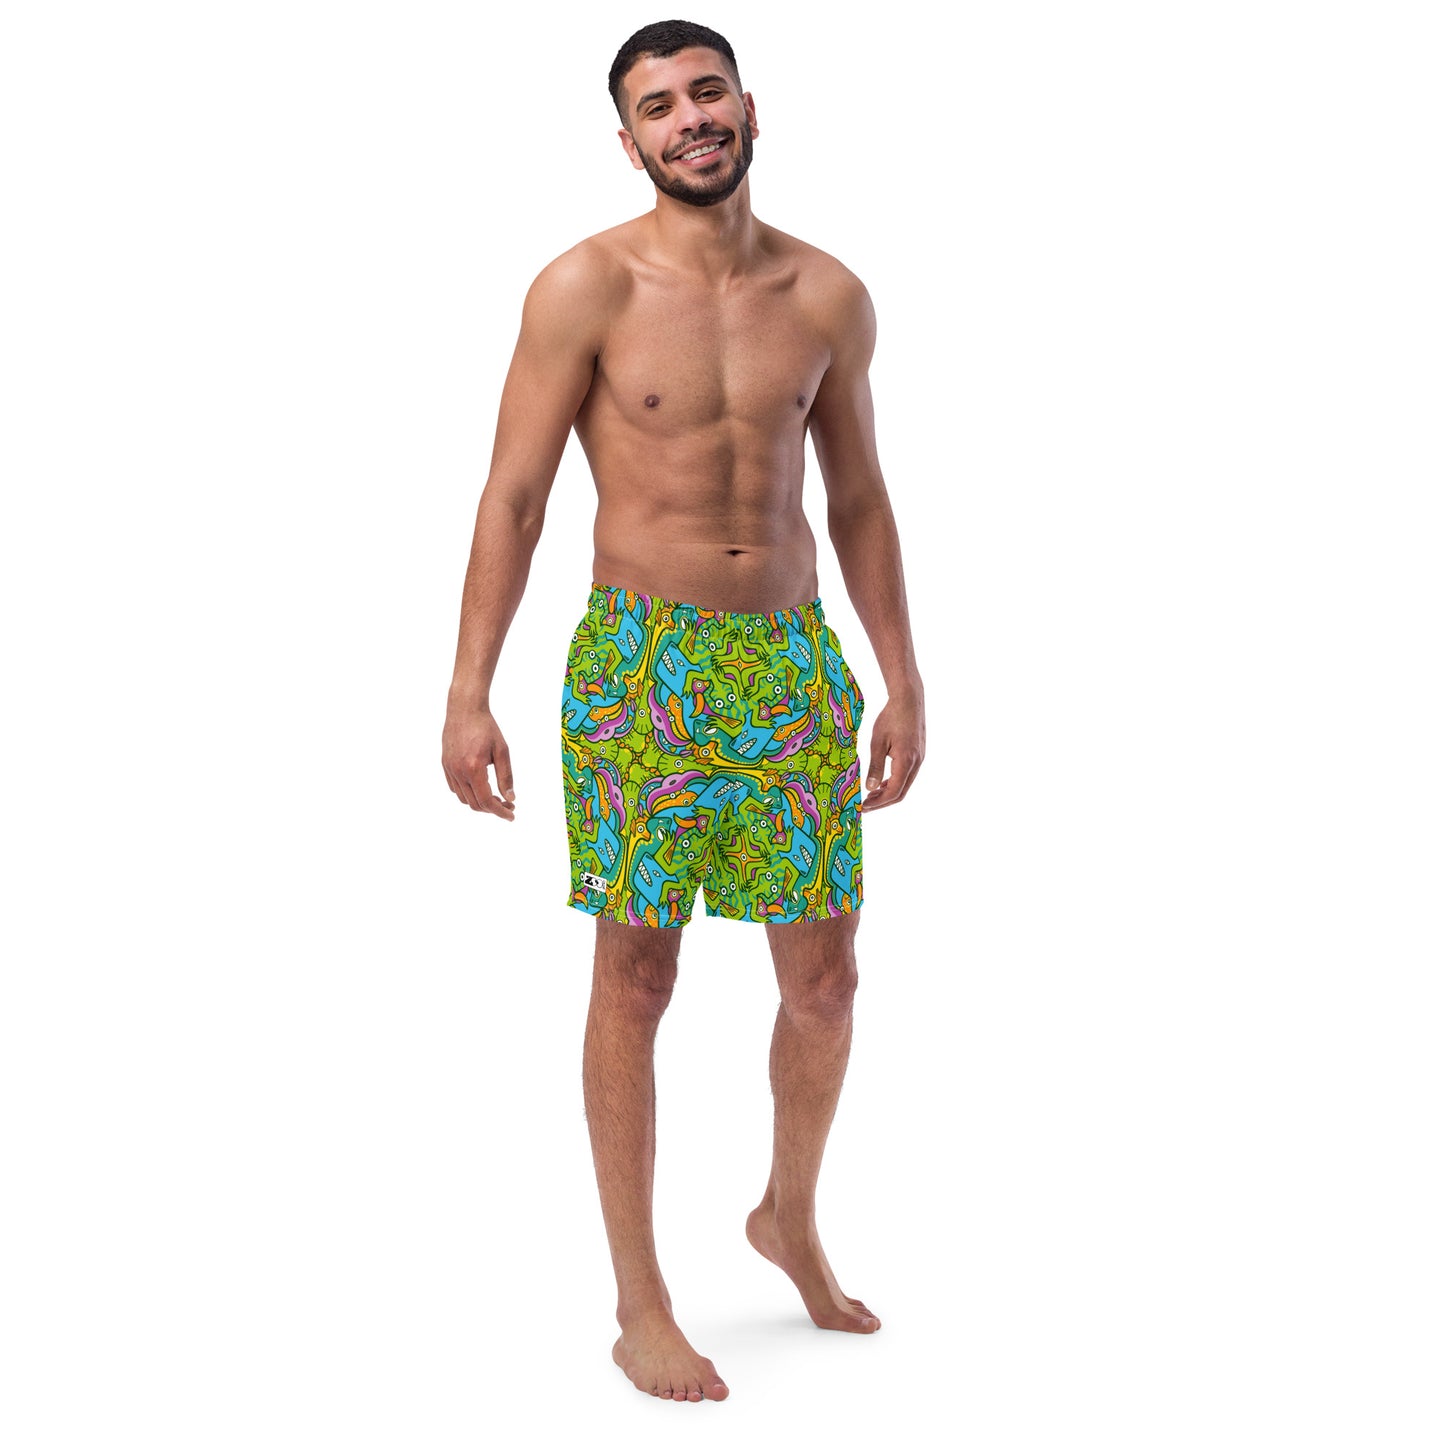 Smiling man wearing Swim trunks All-over printed with To keep calm and doodle is more than just doodling